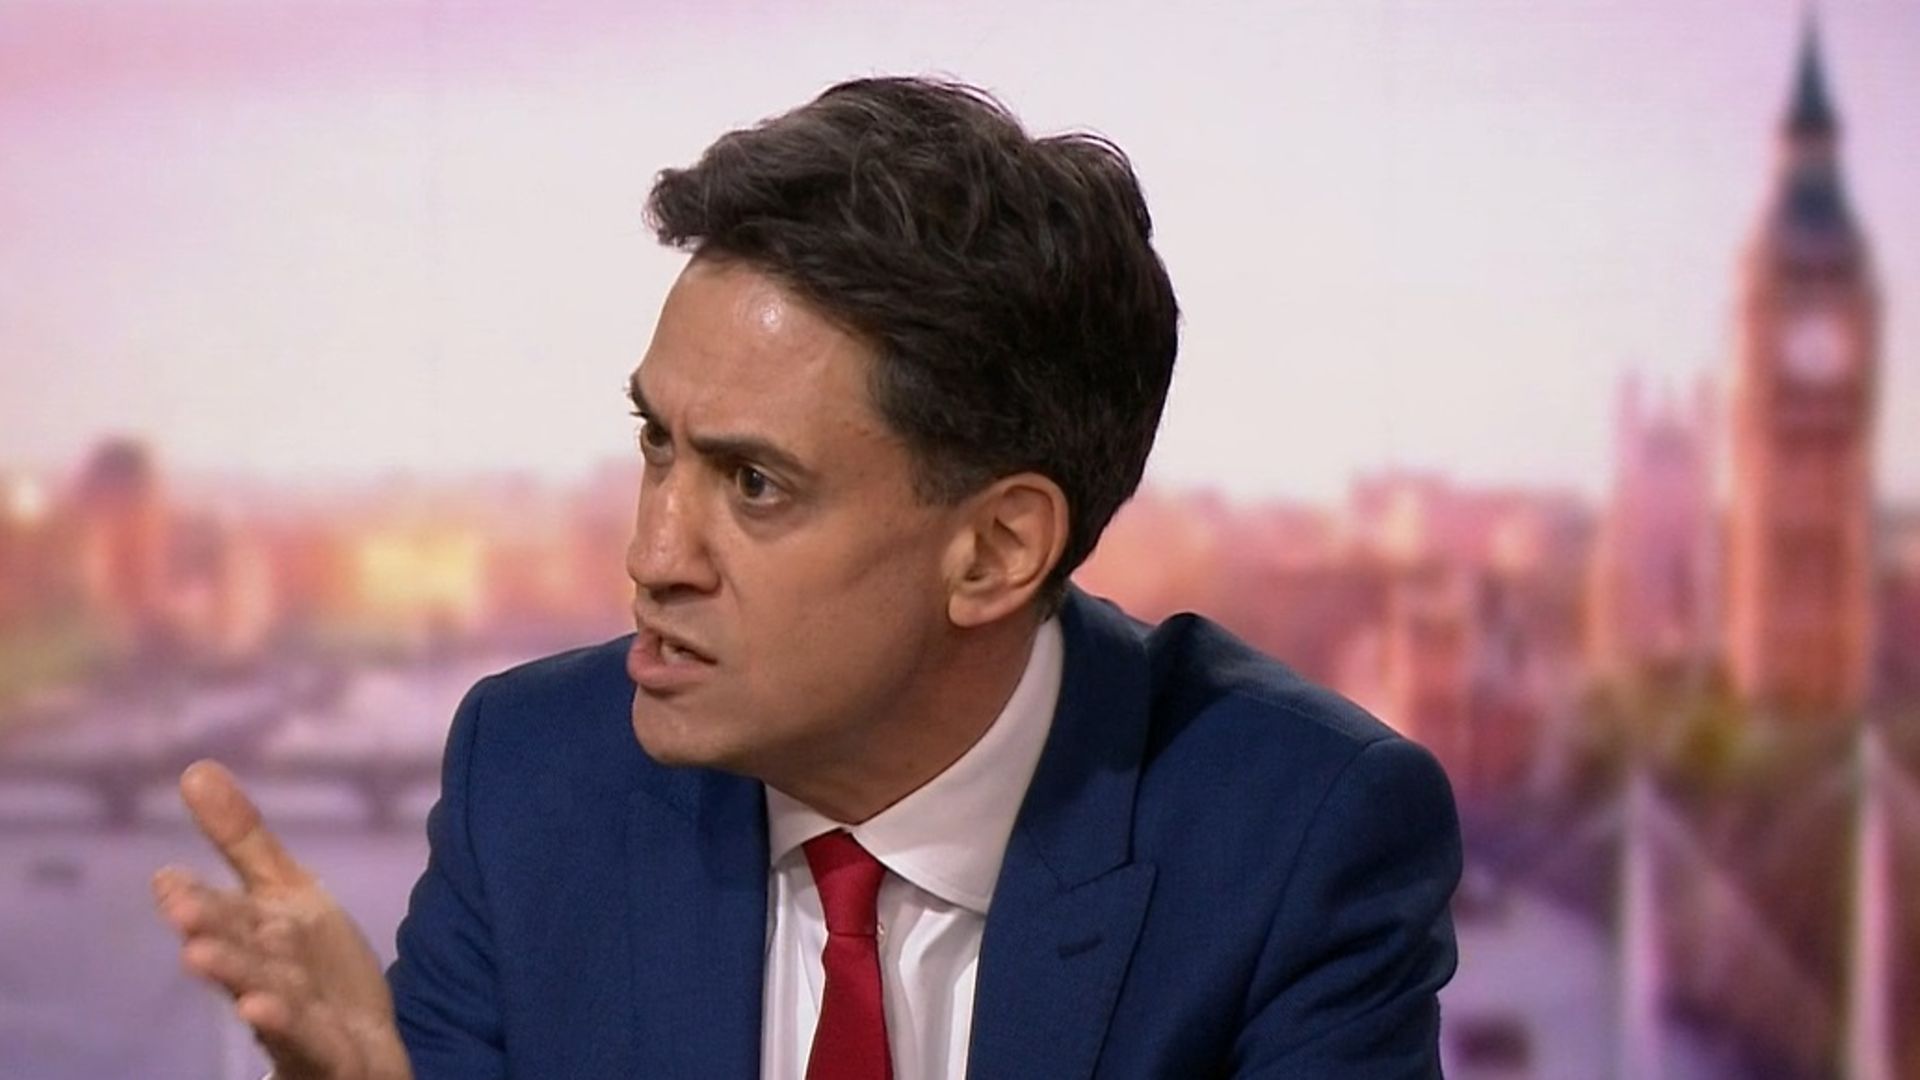 Ed Miliband appears on The Andrew Marr Show - Credit: BBC